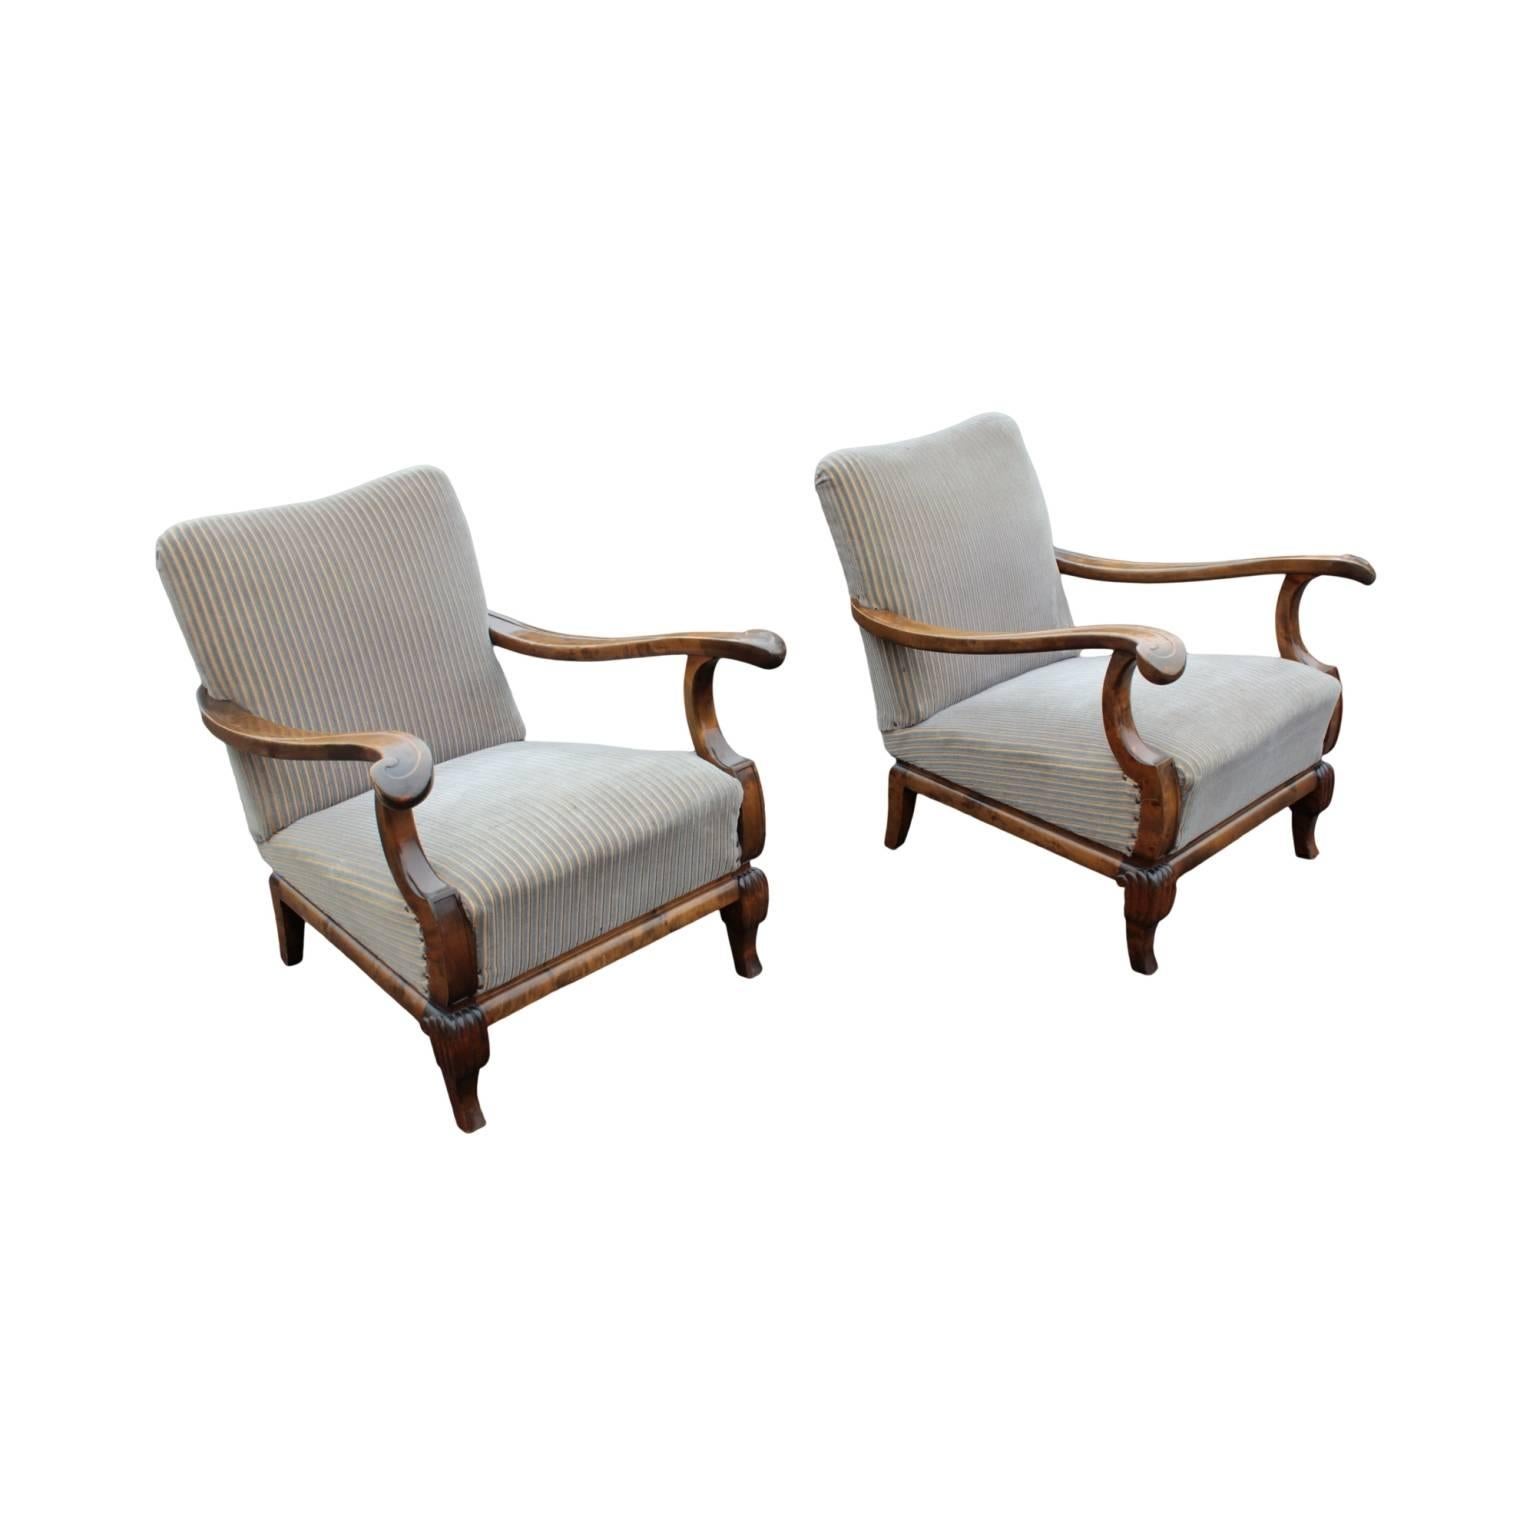 Unusual, elegant and very comfortable pair of arm chairs, each with a padded seat and back having subtly "S" shaped arms ending in carved scrolls with "C" shaped arm supports. Short legs, front pair with carved knees. In flame